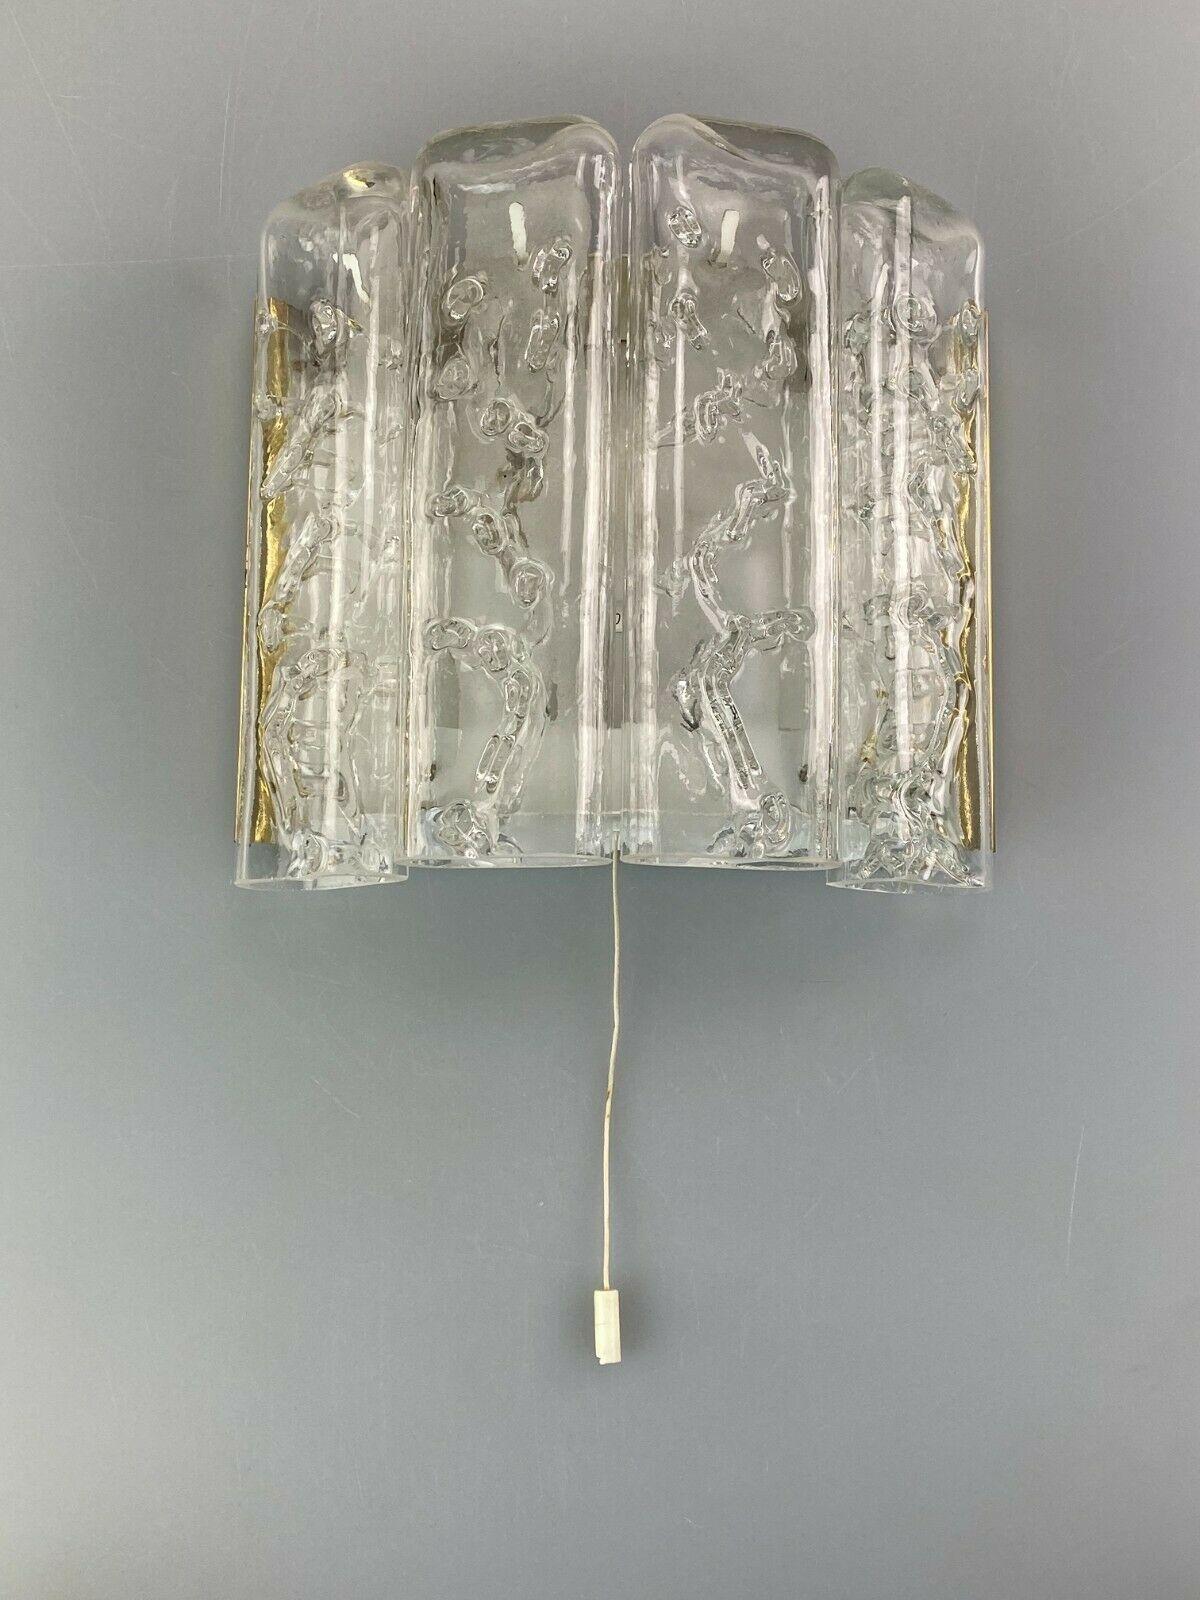 60s 70s Doria lamp light wall lamp wall sconce Space Age 60s design.

Object: wall lamp

Manufacturer: Doria

Condition: good

Age: around 1960-1970

Dimensions:

24cm x 22cm x 9cm

Other notes:

The pictures serve as part of the